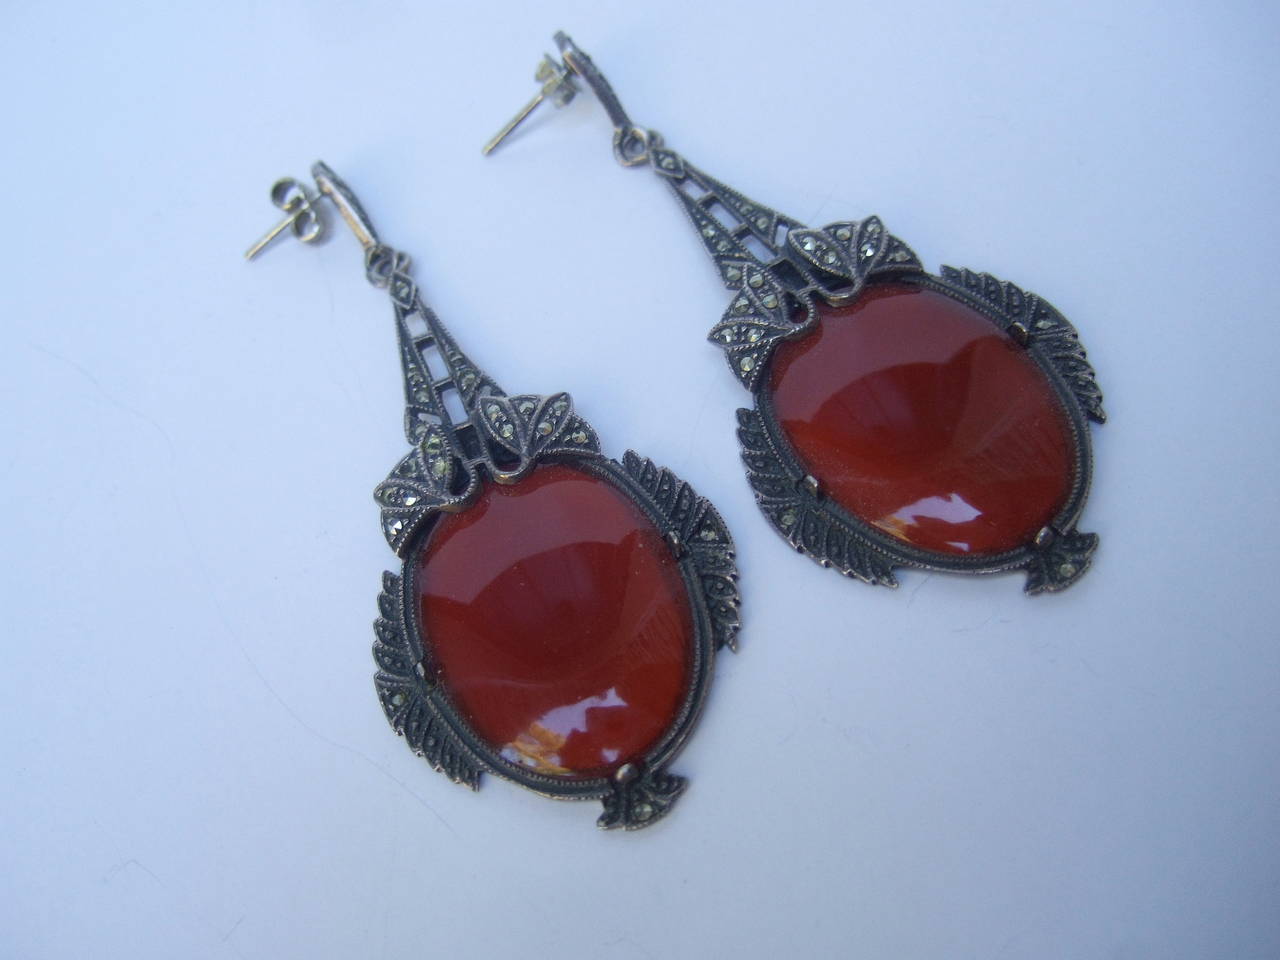 Exquisite dangling carnelian glass marcasite earrings c 1950s
The ornate art deco pendant style pierced earrings are designed
with large carnelian smooth oval shaped glass stones

The large opaque stones are encased is pewter tone